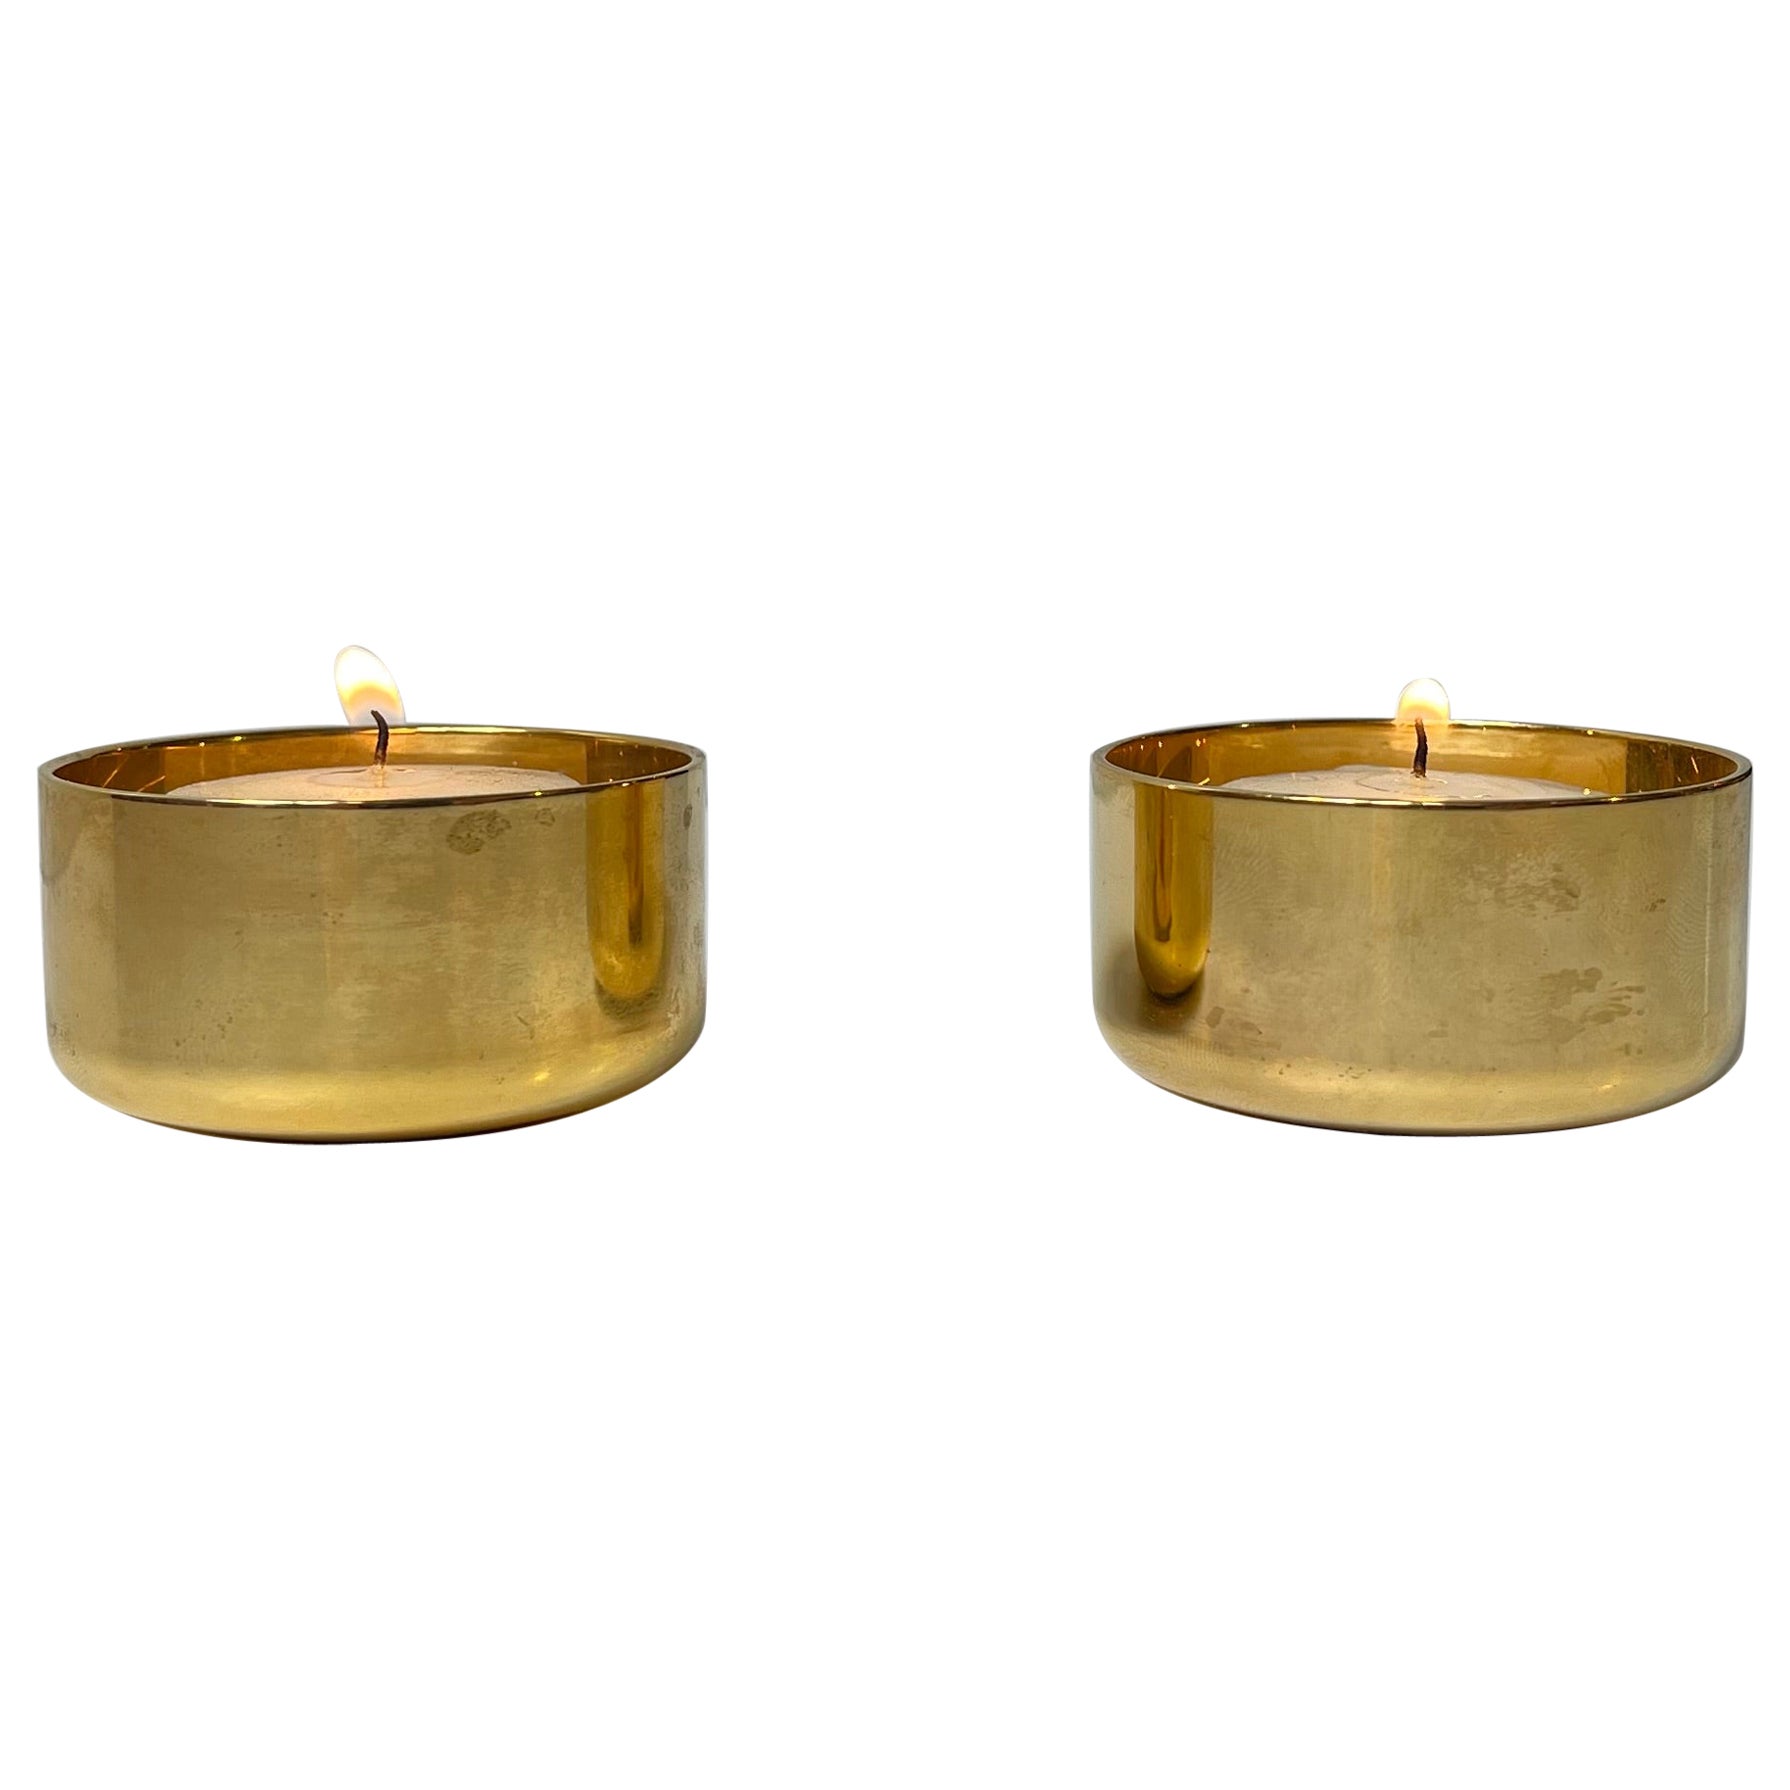 Gold Plated Tealight Candleholders by Pierre Forssell for Skultuna, Sweden 1960s For Sale